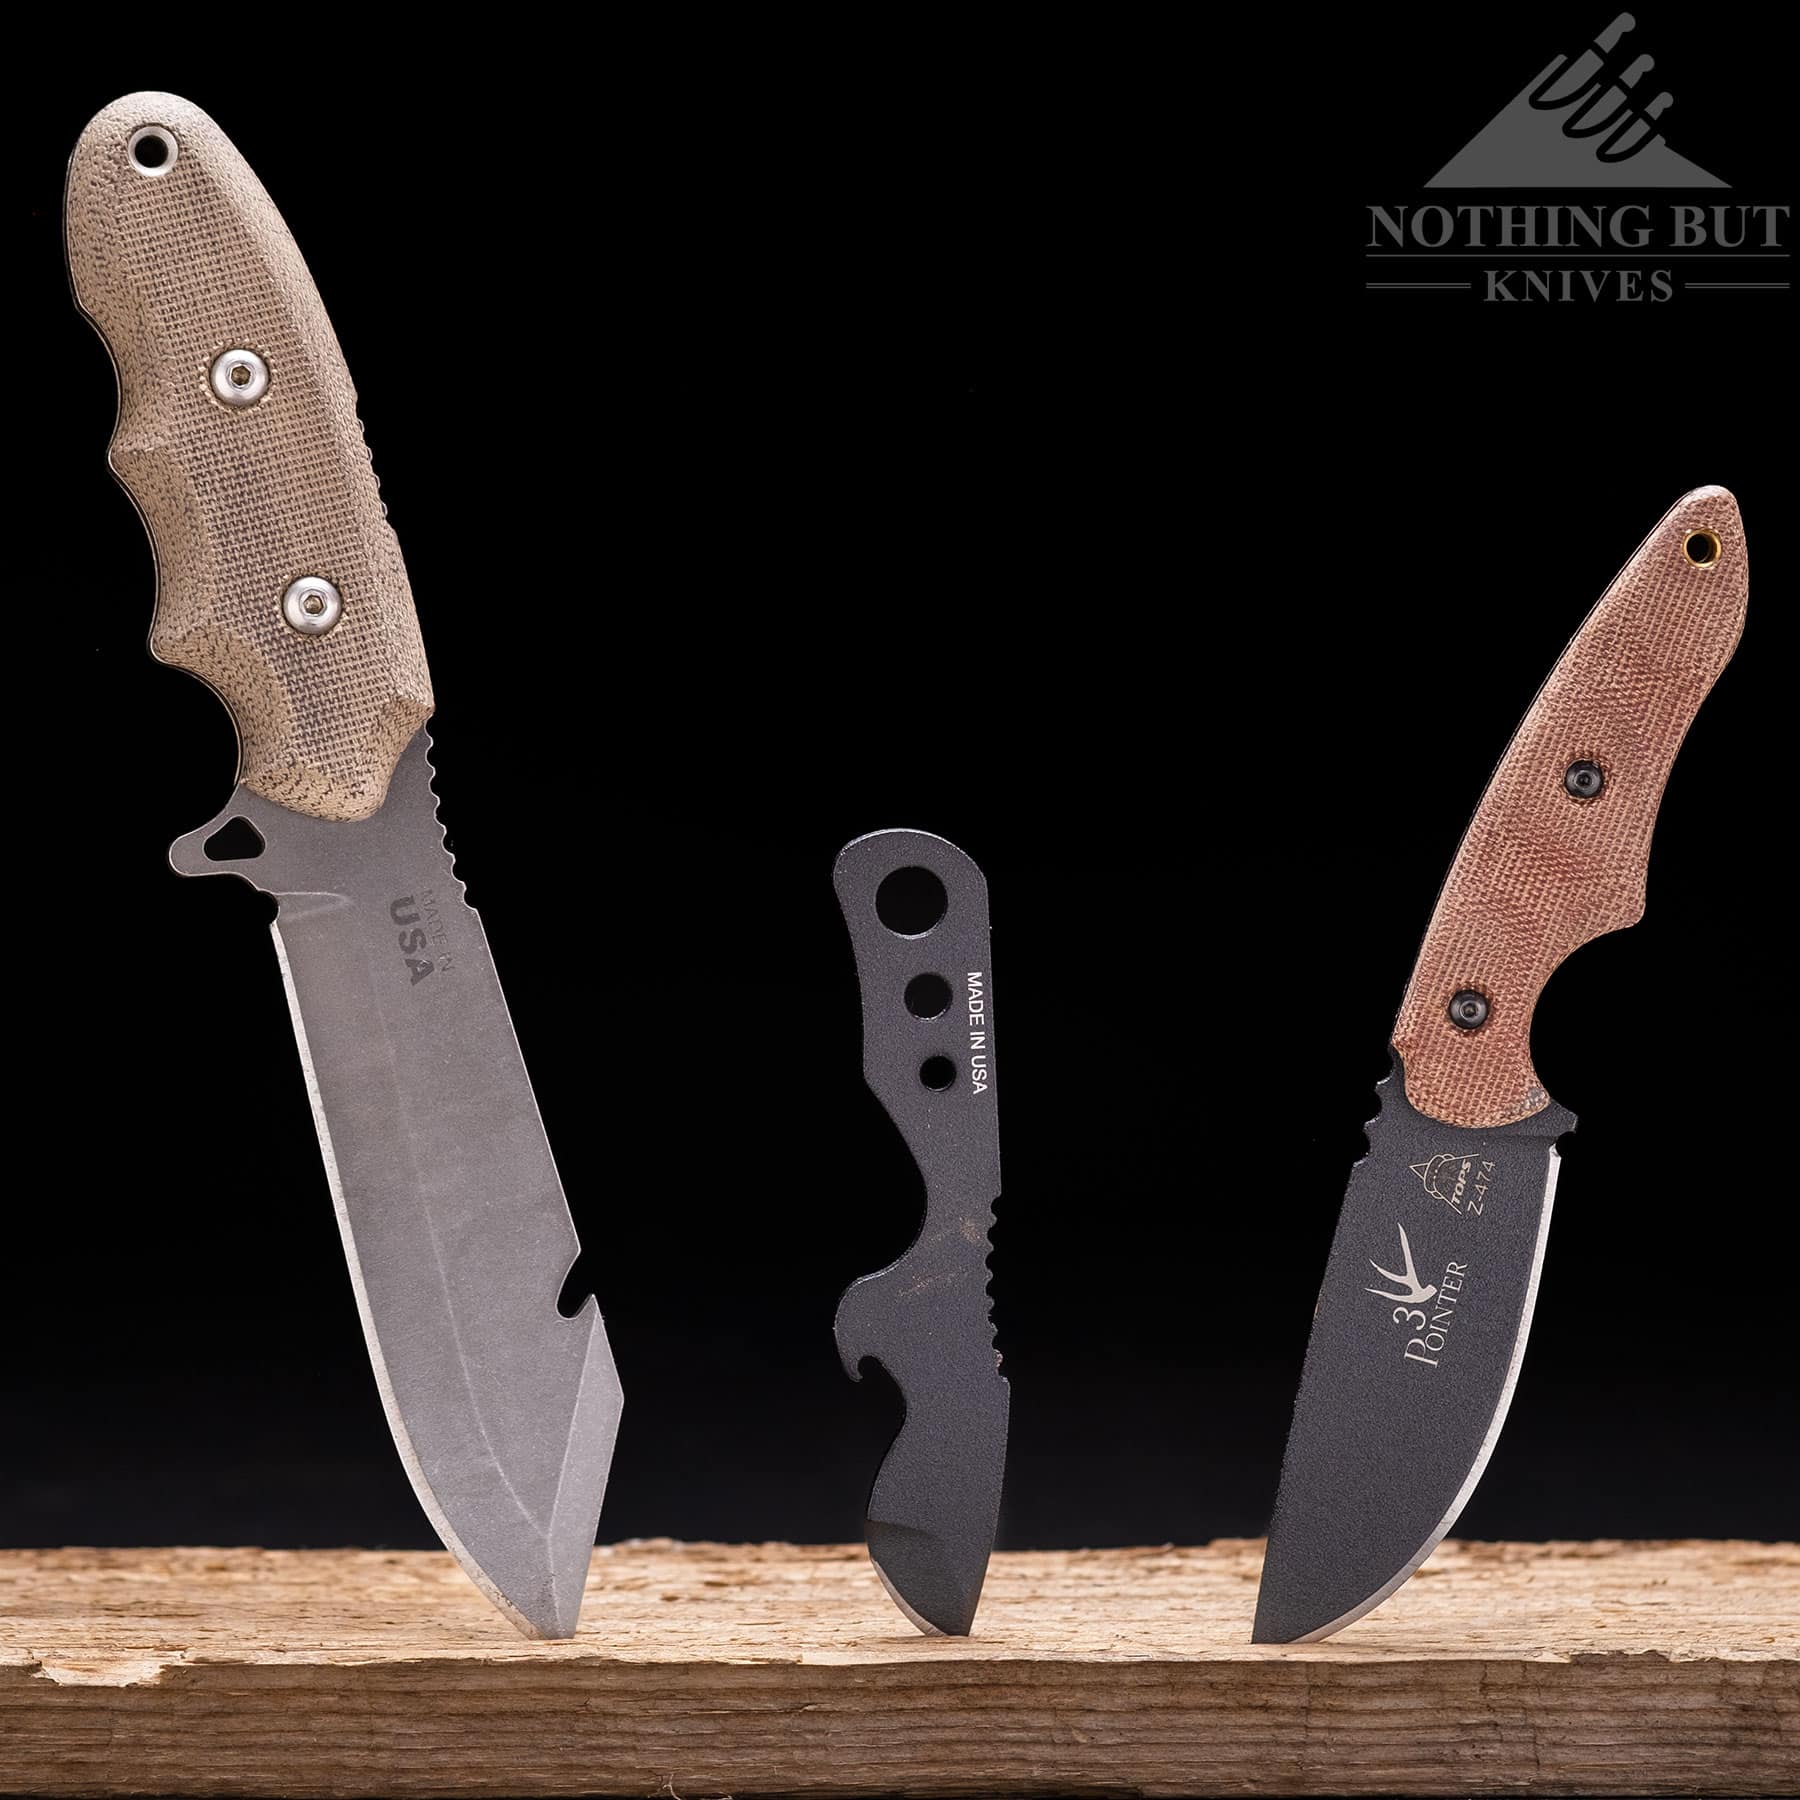 Three TOPS fixed blade knives of various sizes and styles to show the diversity of option offered by TOPS Knives.